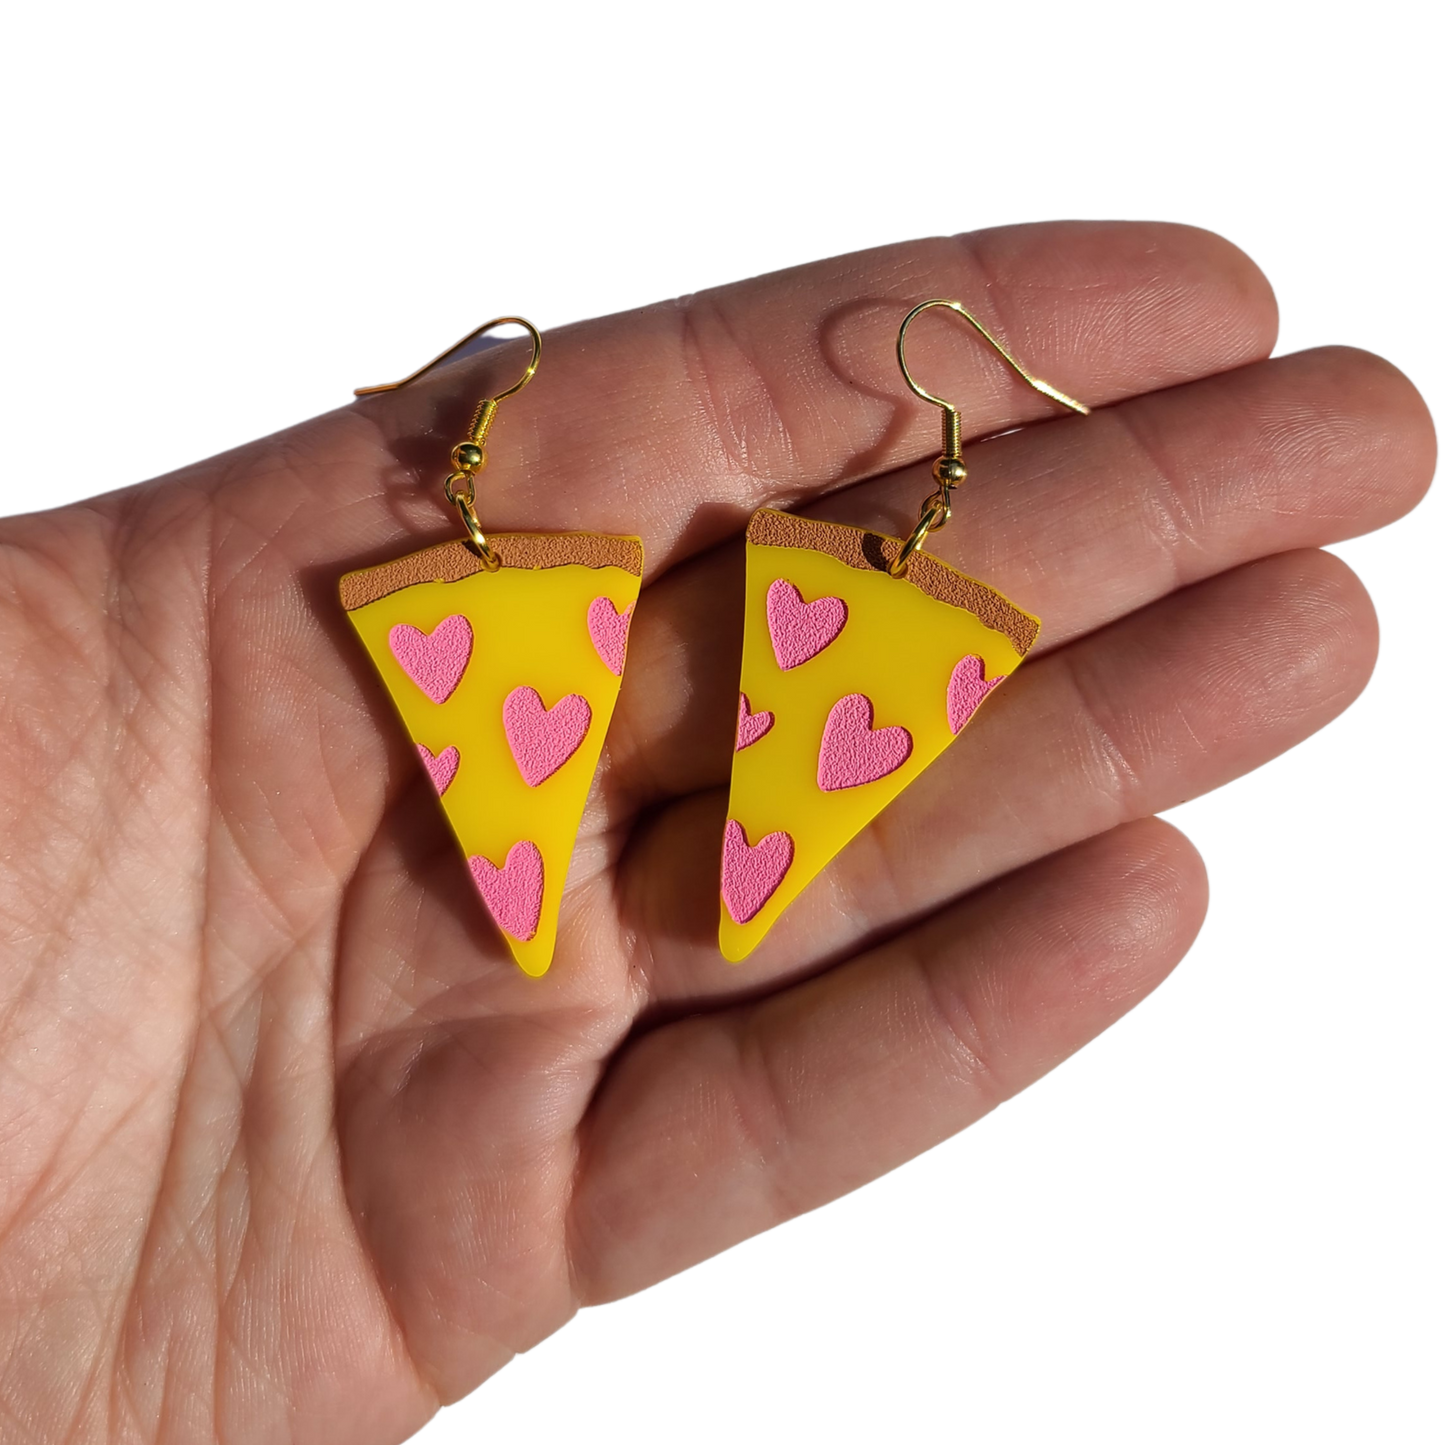 Pizza Slices with Heart Pepperoni  - Laser Cut Earrings